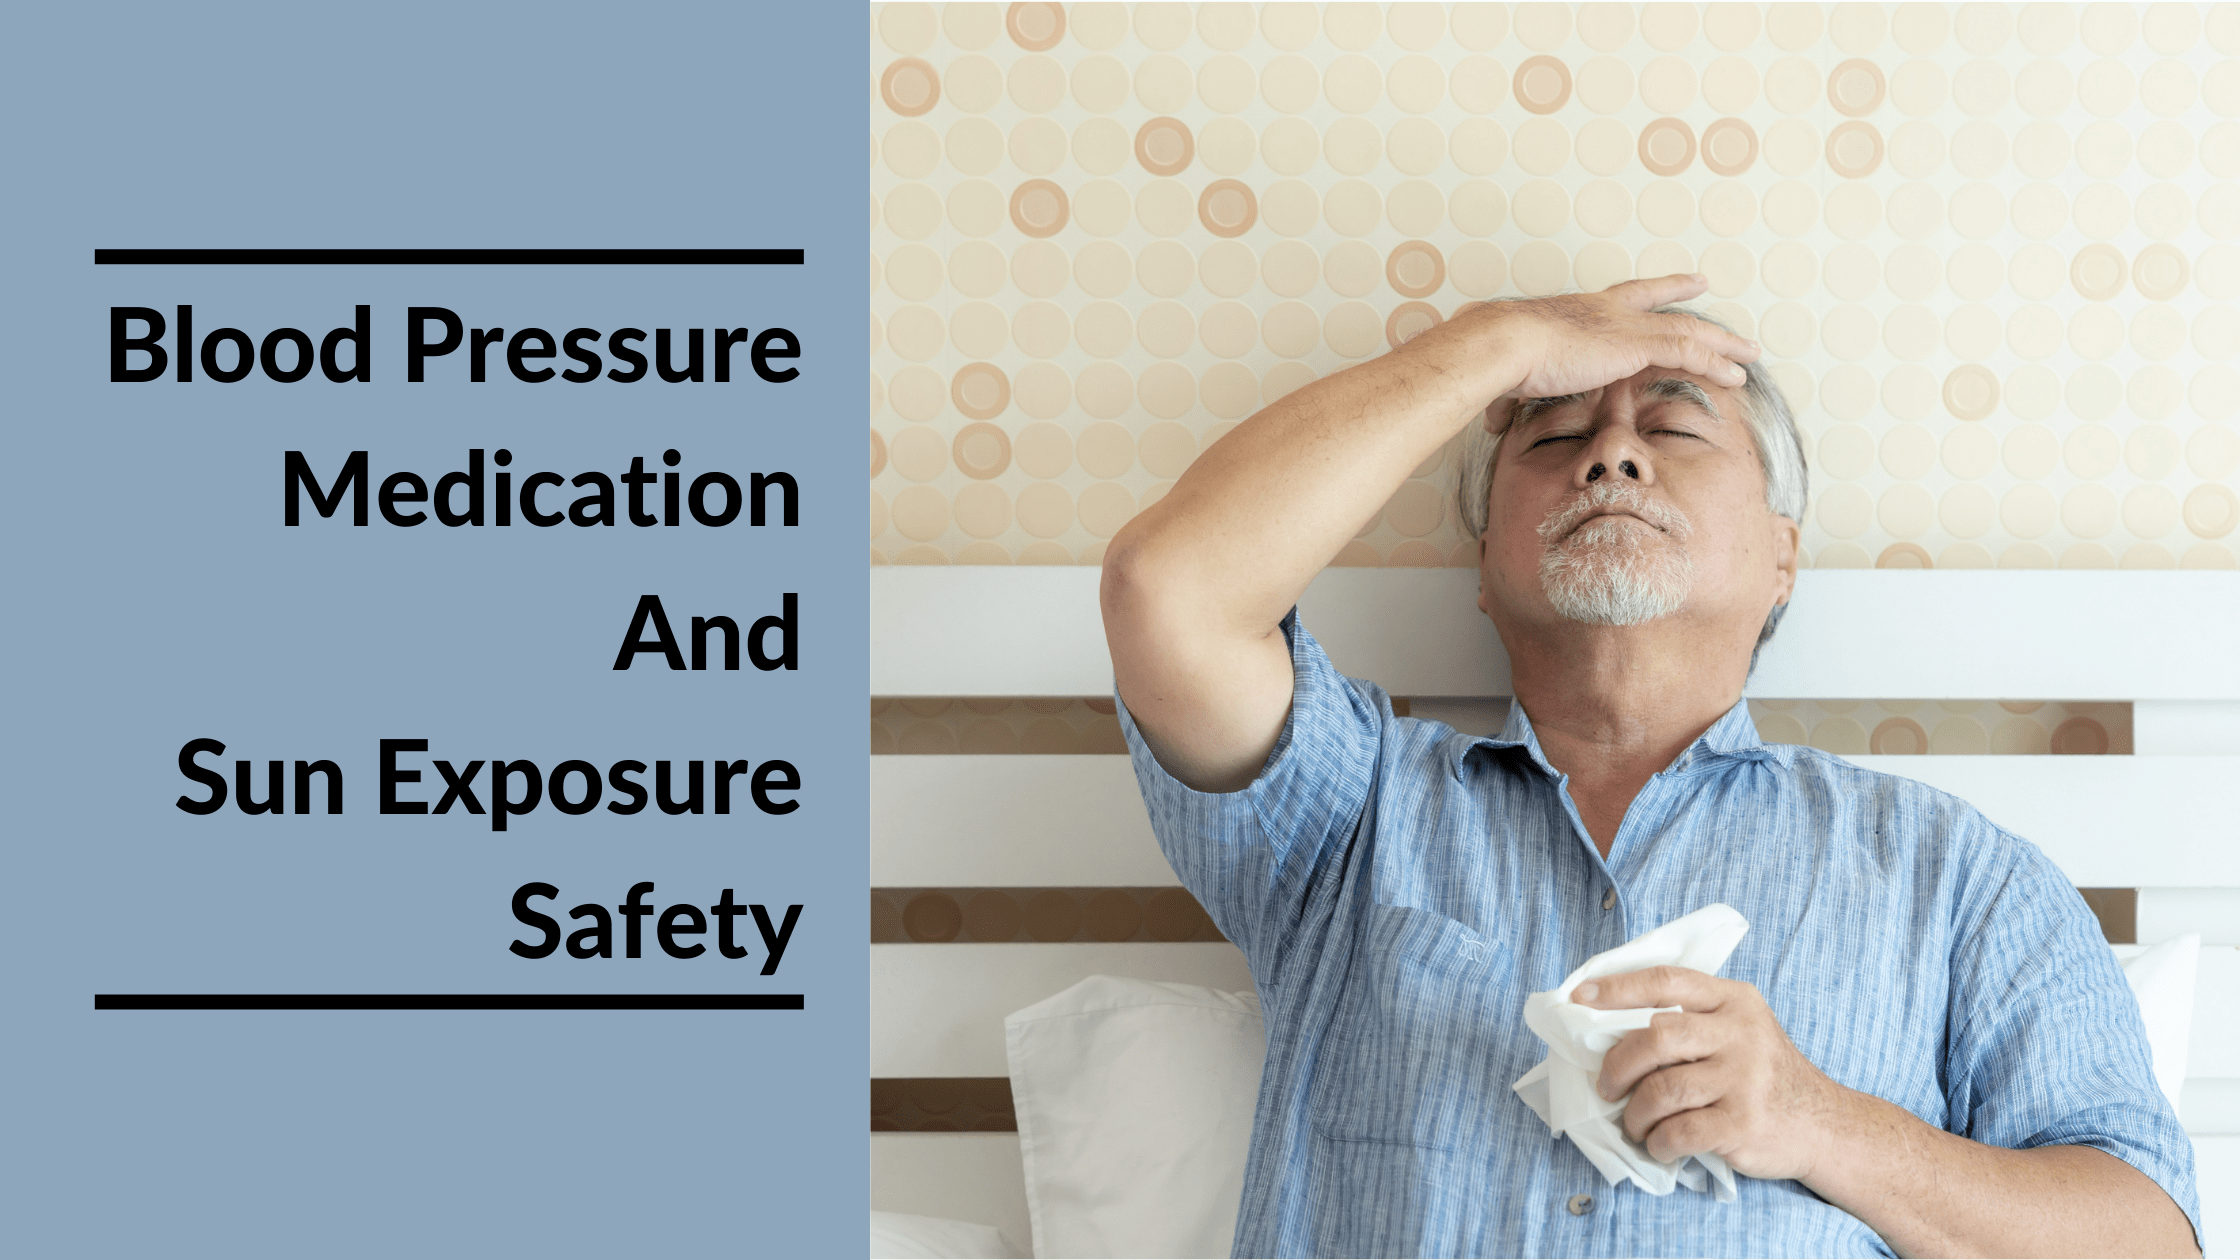 Blood Pressure Medication And Sun Exposure Featured Image